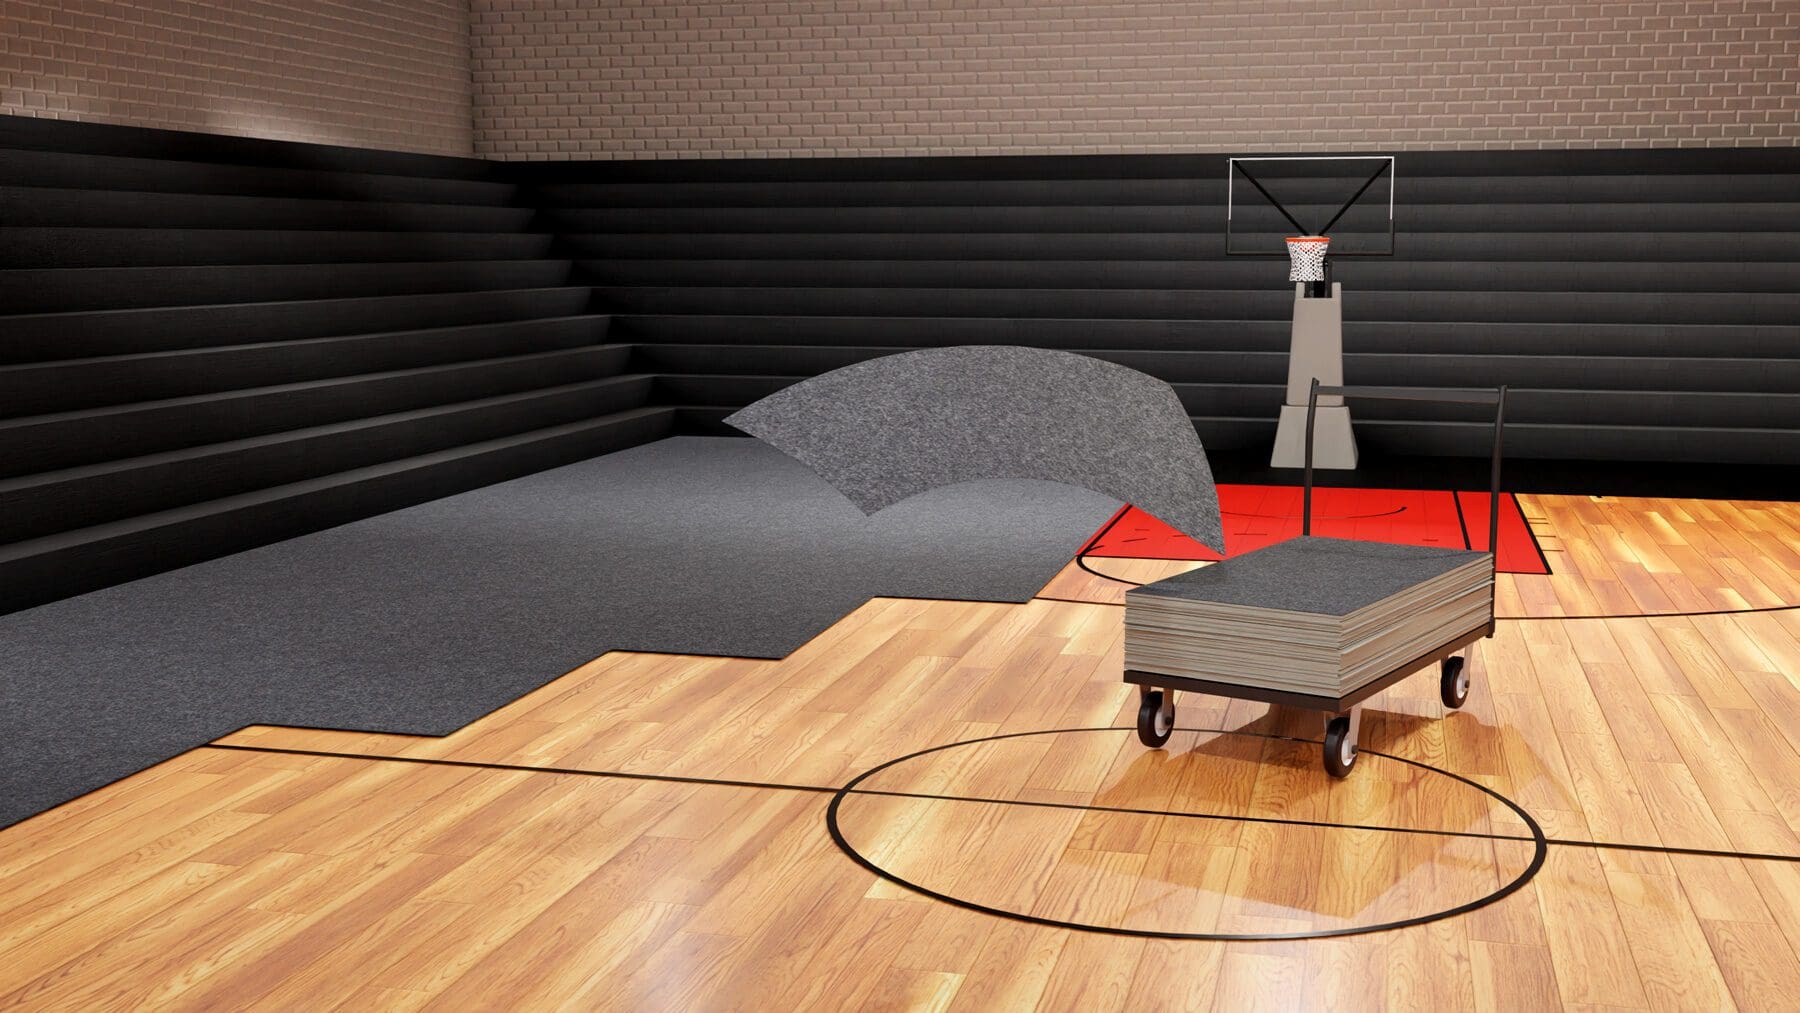 A room with a basketball court and a couch